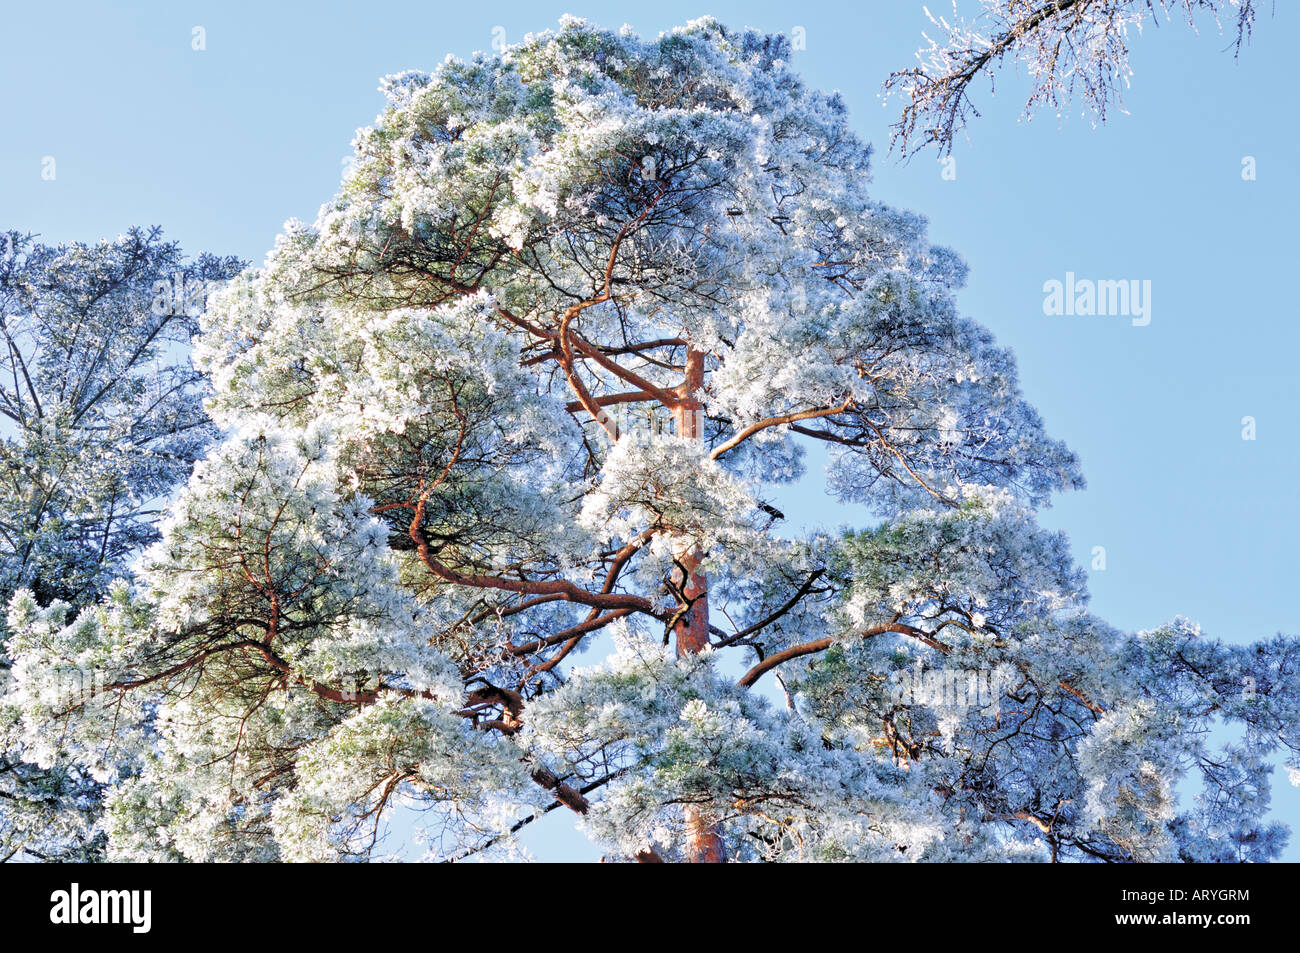 Top of a pine tree in winter, Limbach, Odenwald, Baden-Württemberg, Germany Stock Photo